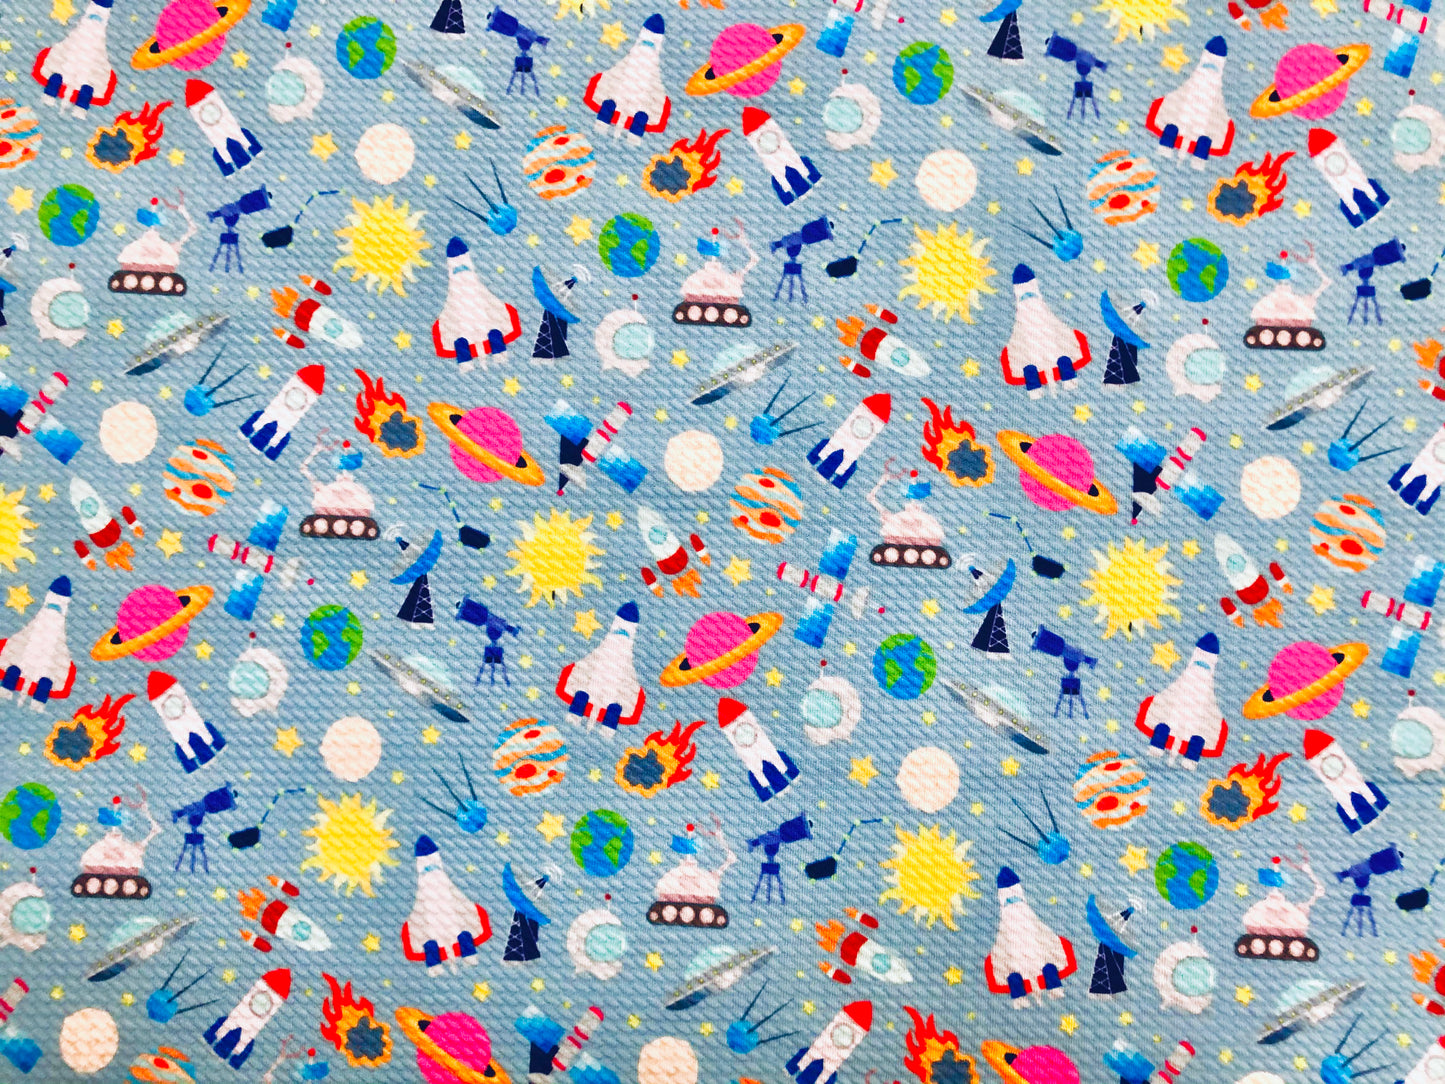 Bullet Knit Printed Fabric-Baby Blue Yellow Outer Space-BPR200-Sold by the Yard-Bulk Available